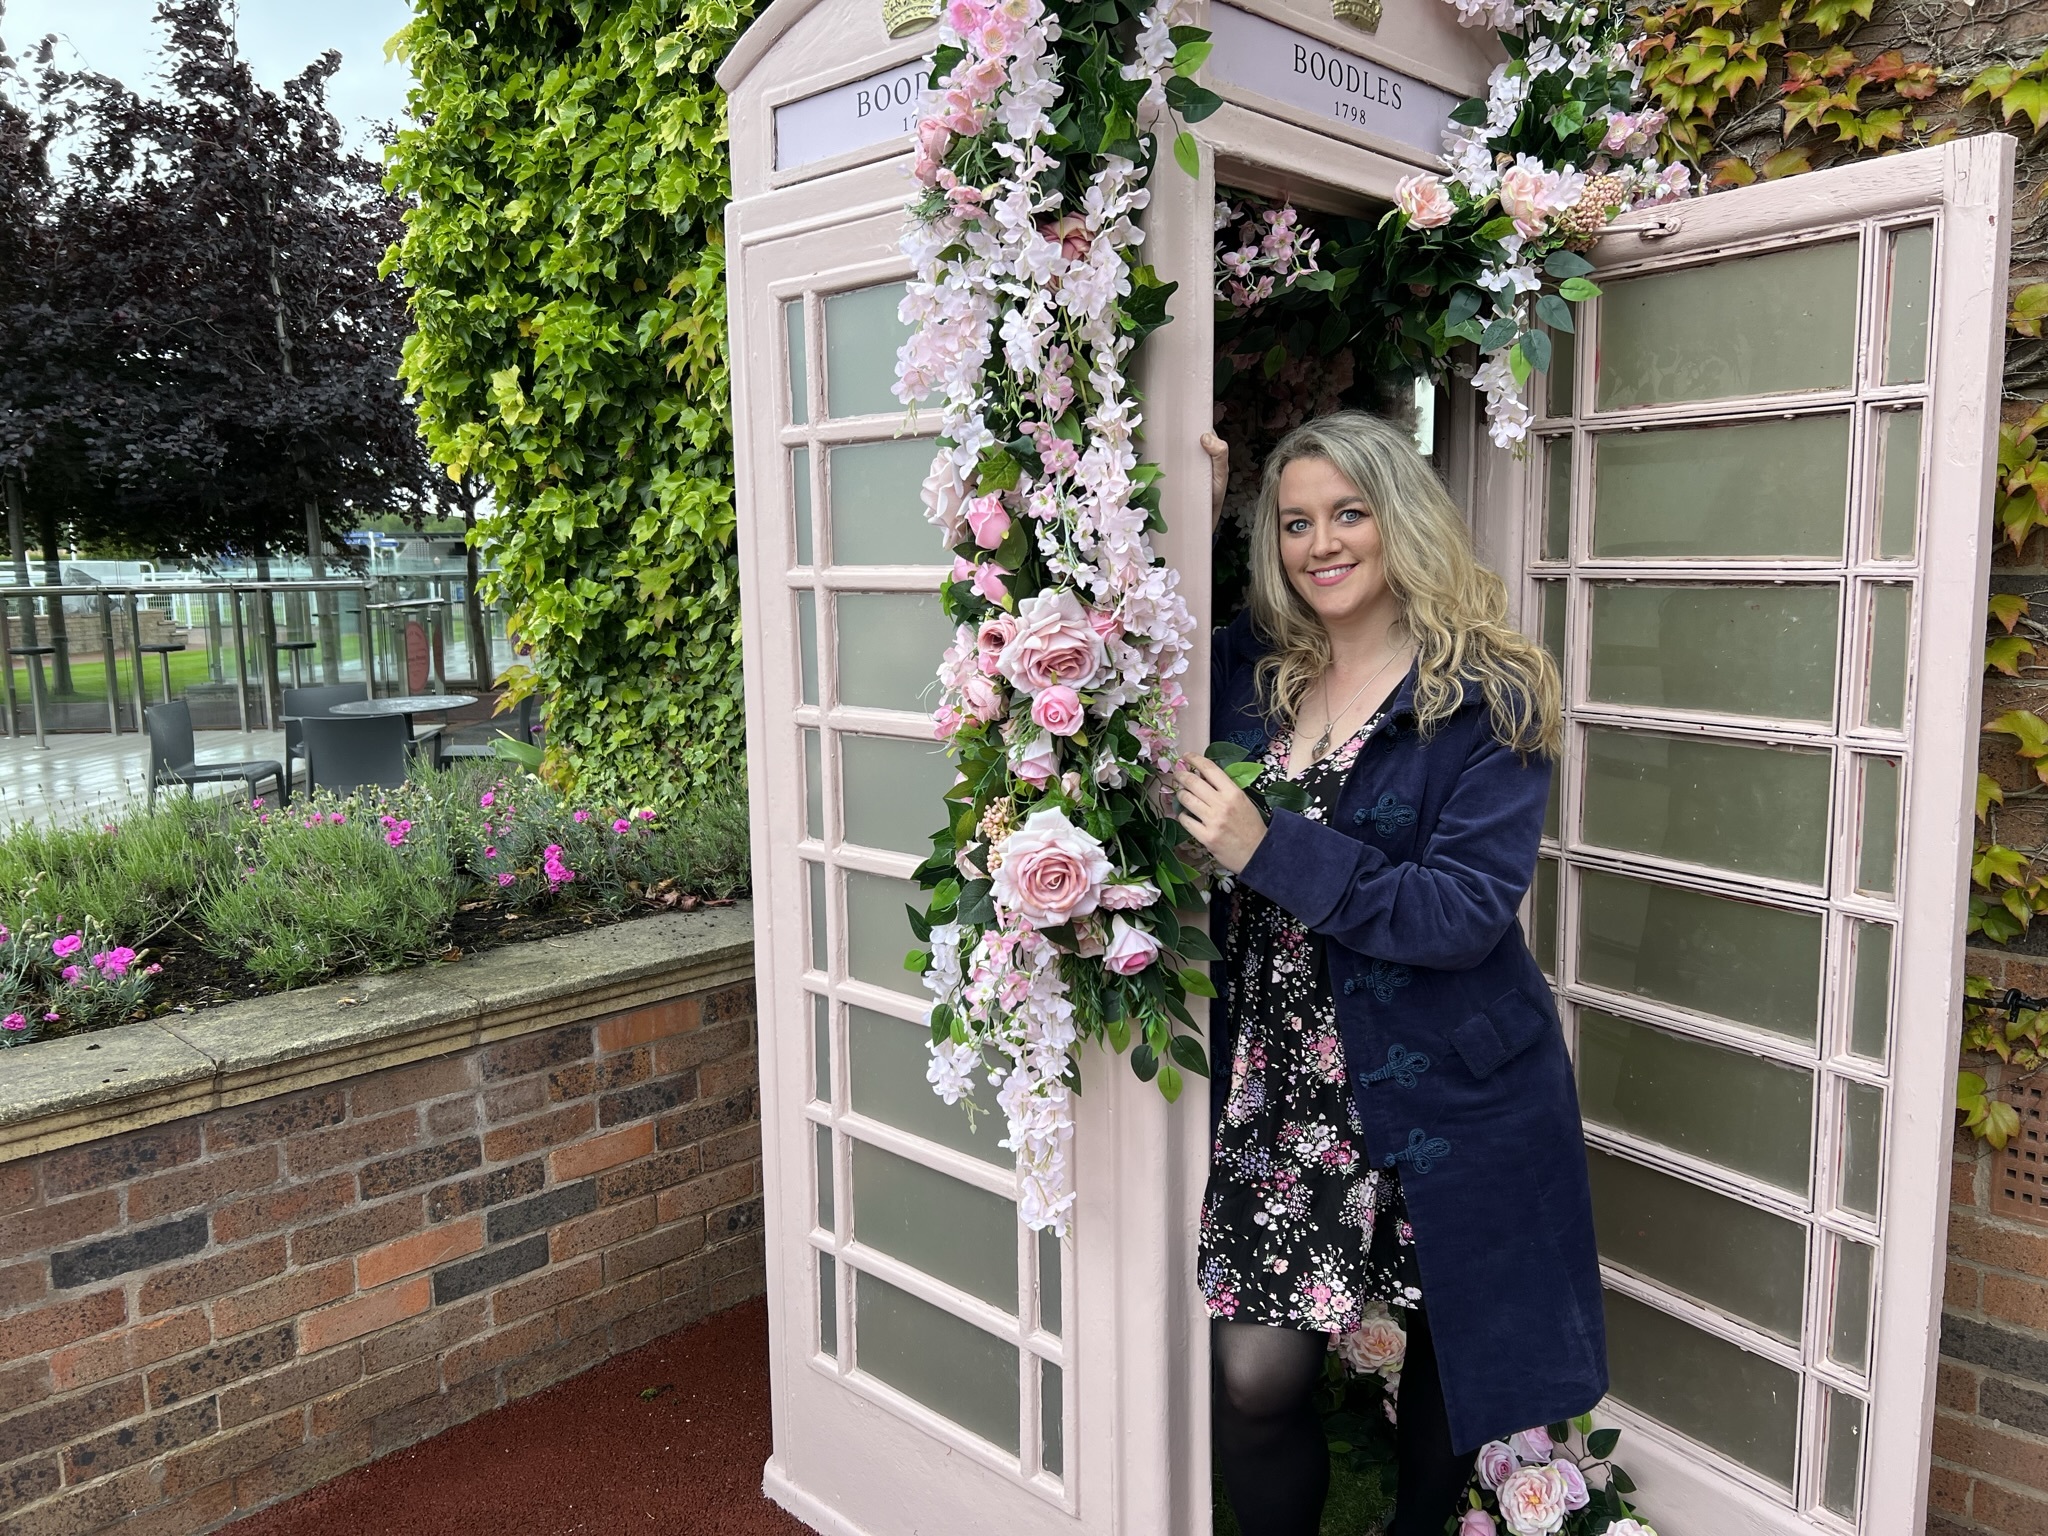 Emma has had some unusual projects like adding floral decorations to this old phone box